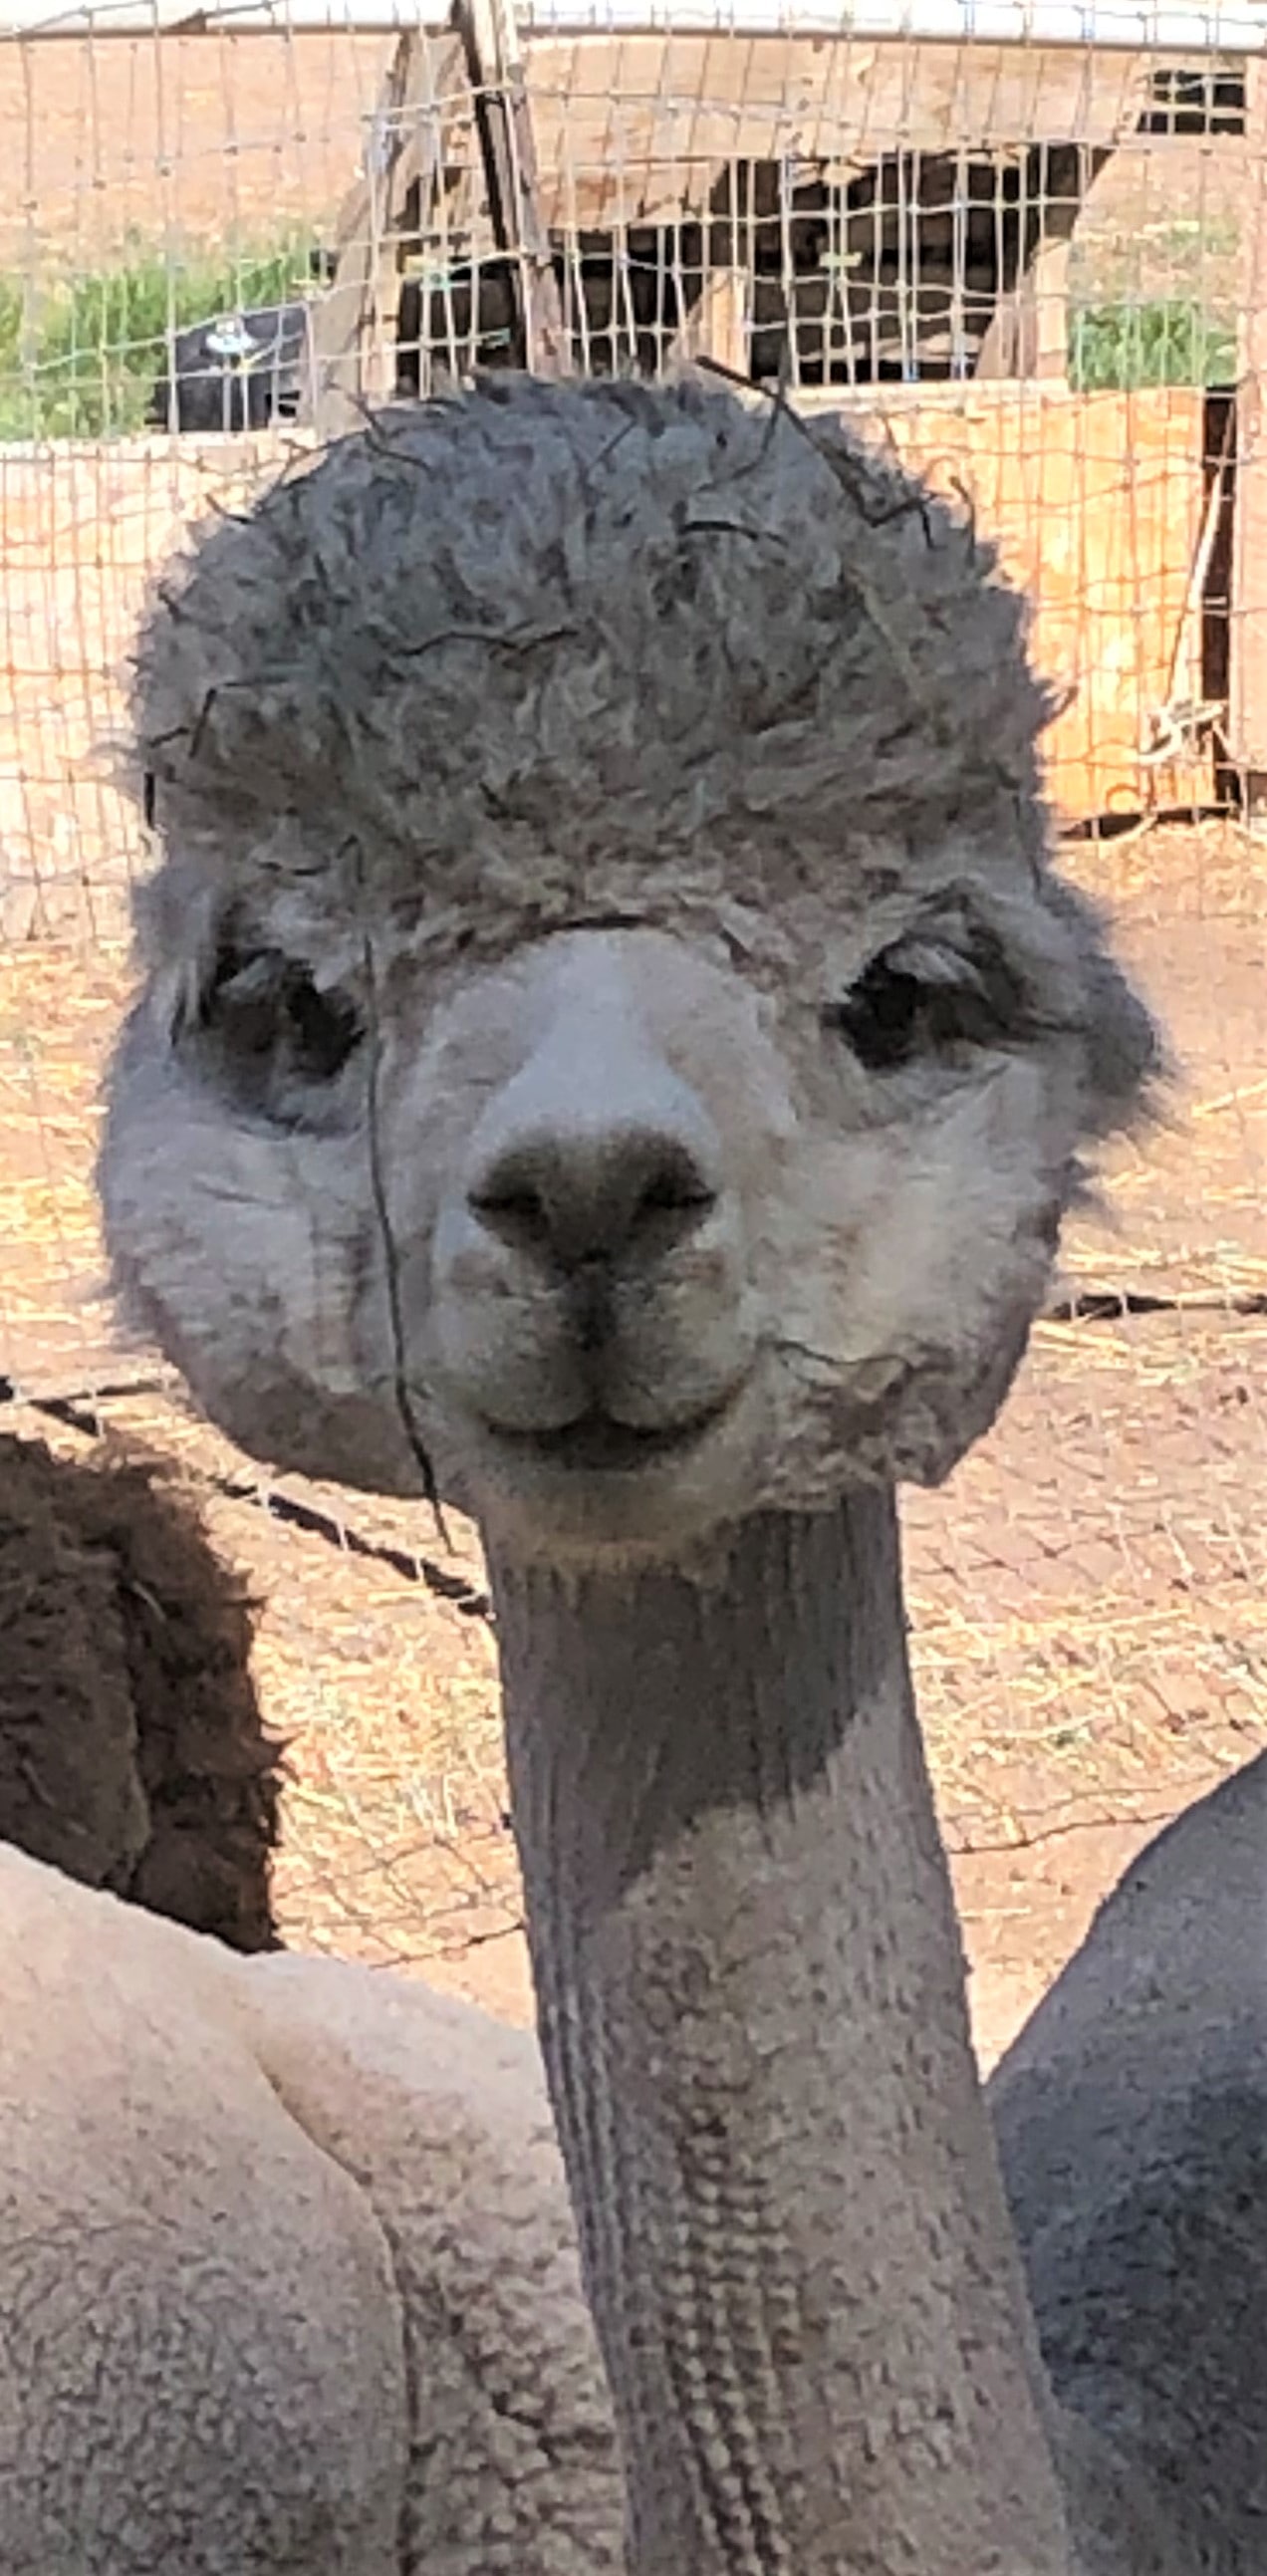 Alpaca with a freshly shorn neck and poofy hair